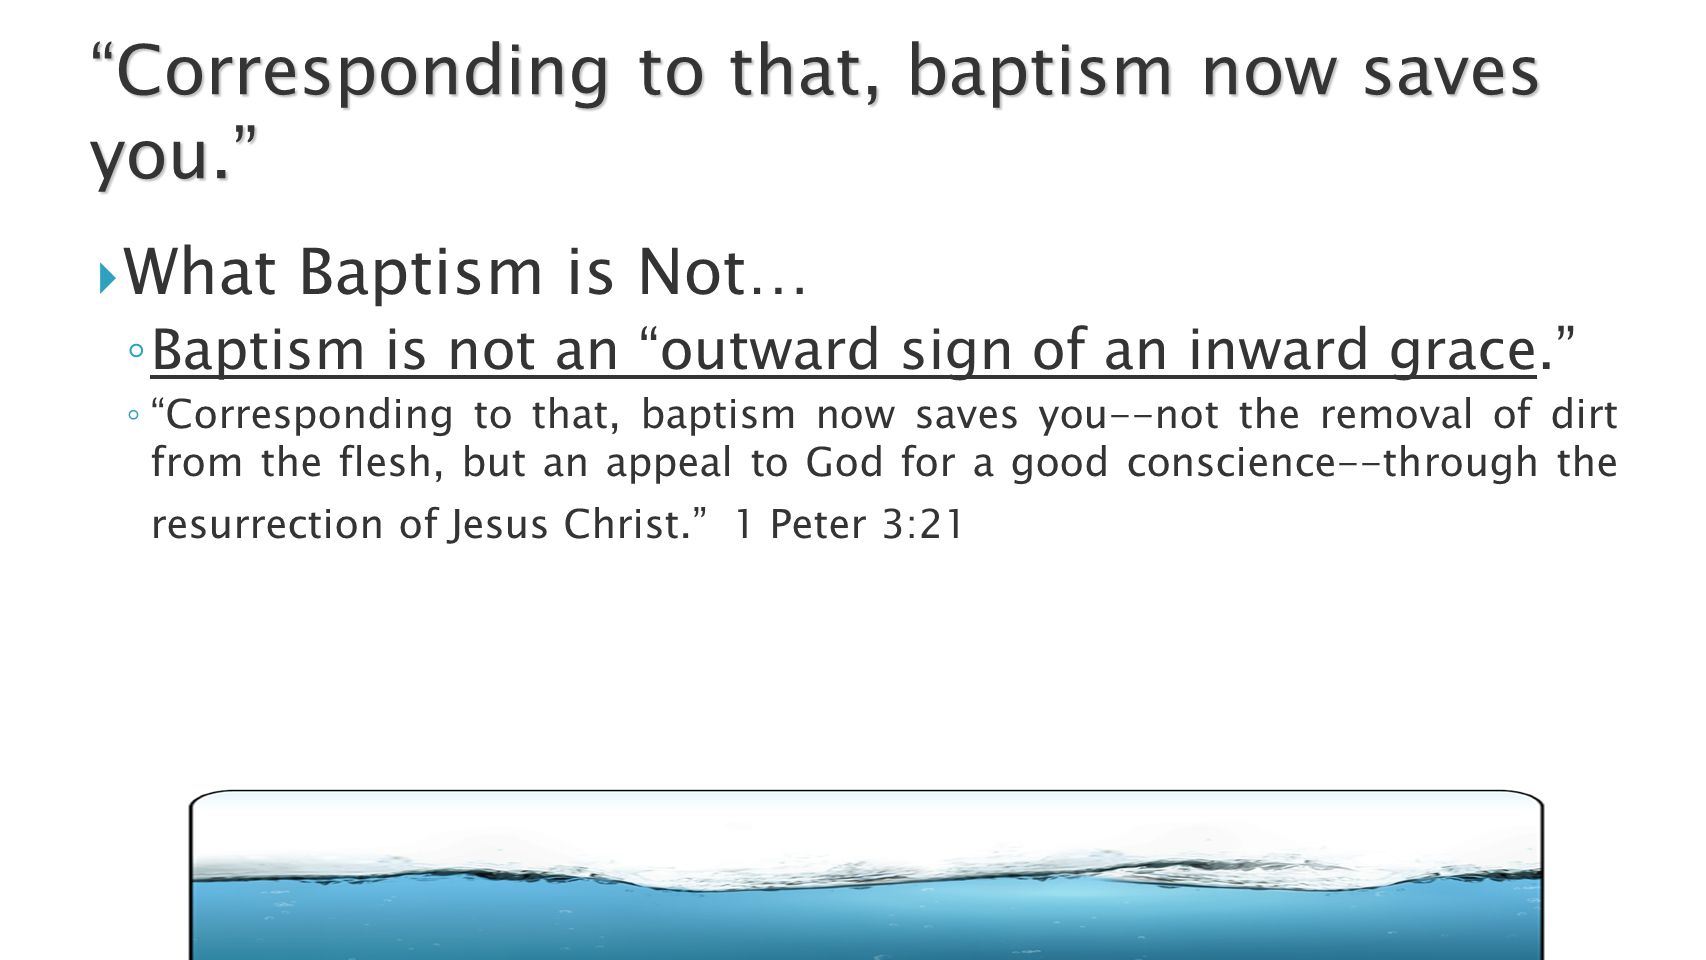  What Baptism is Not… ◦ Baptism is not an outward sign of an inward grace. ◦ Corresponding to that, baptism now saves you--not the removal of dirt from the flesh, but an appeal to God for a good conscience--through the resurrection of Jesus Christ. 1 Peter 3:21 Corresponding to that, baptism now saves you.